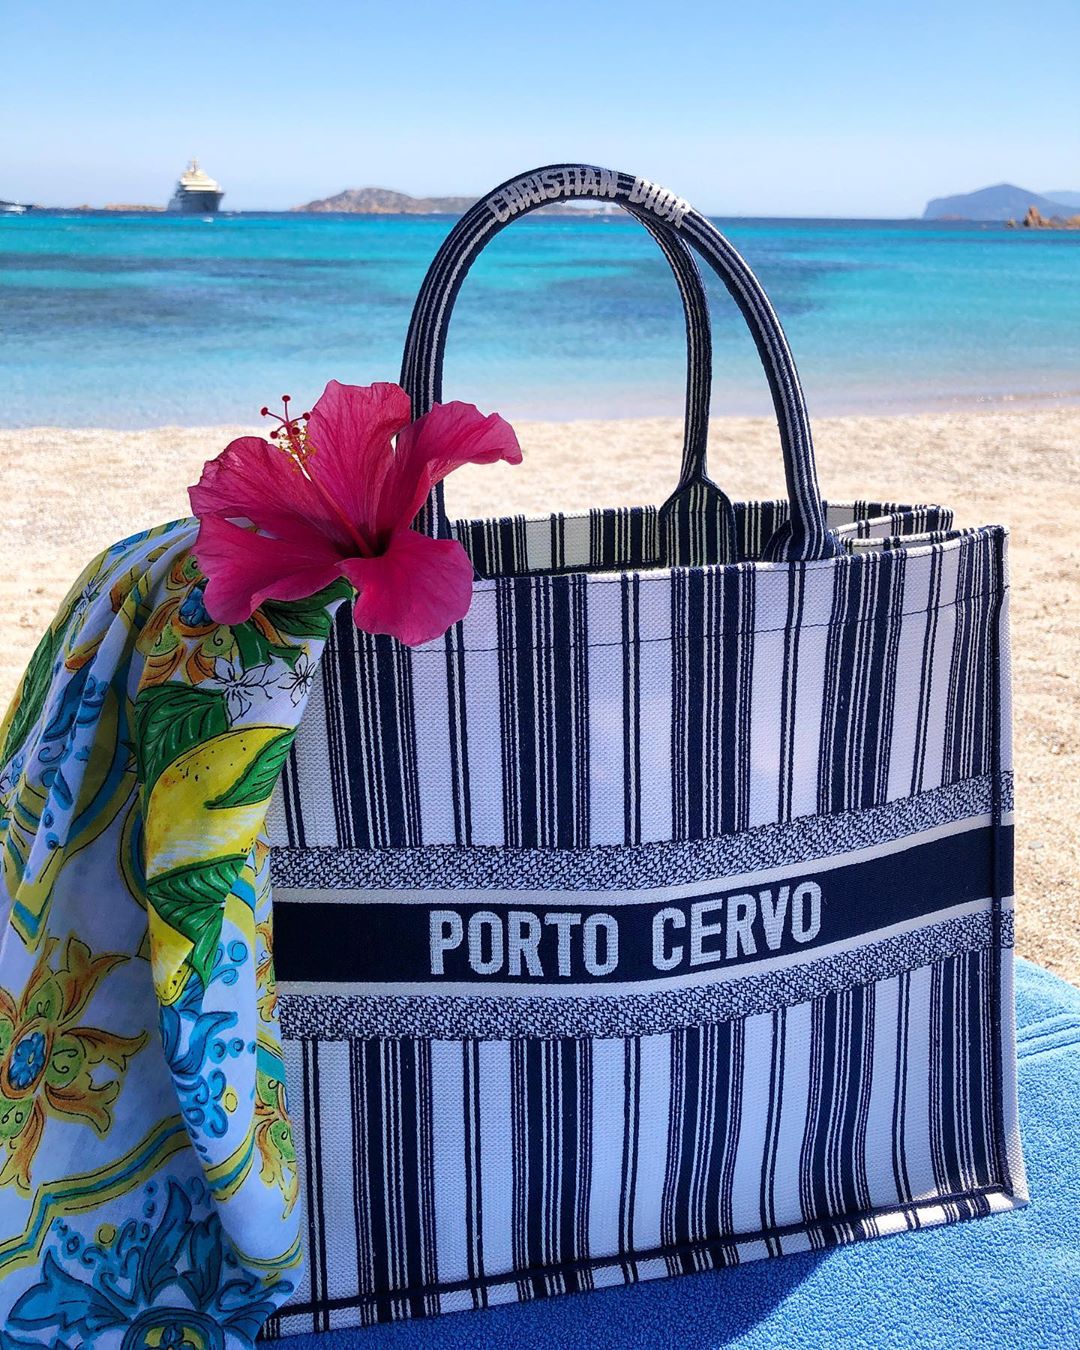 Dior Dioriviera Book Totes for the 2019 Beach Collection - Spotted